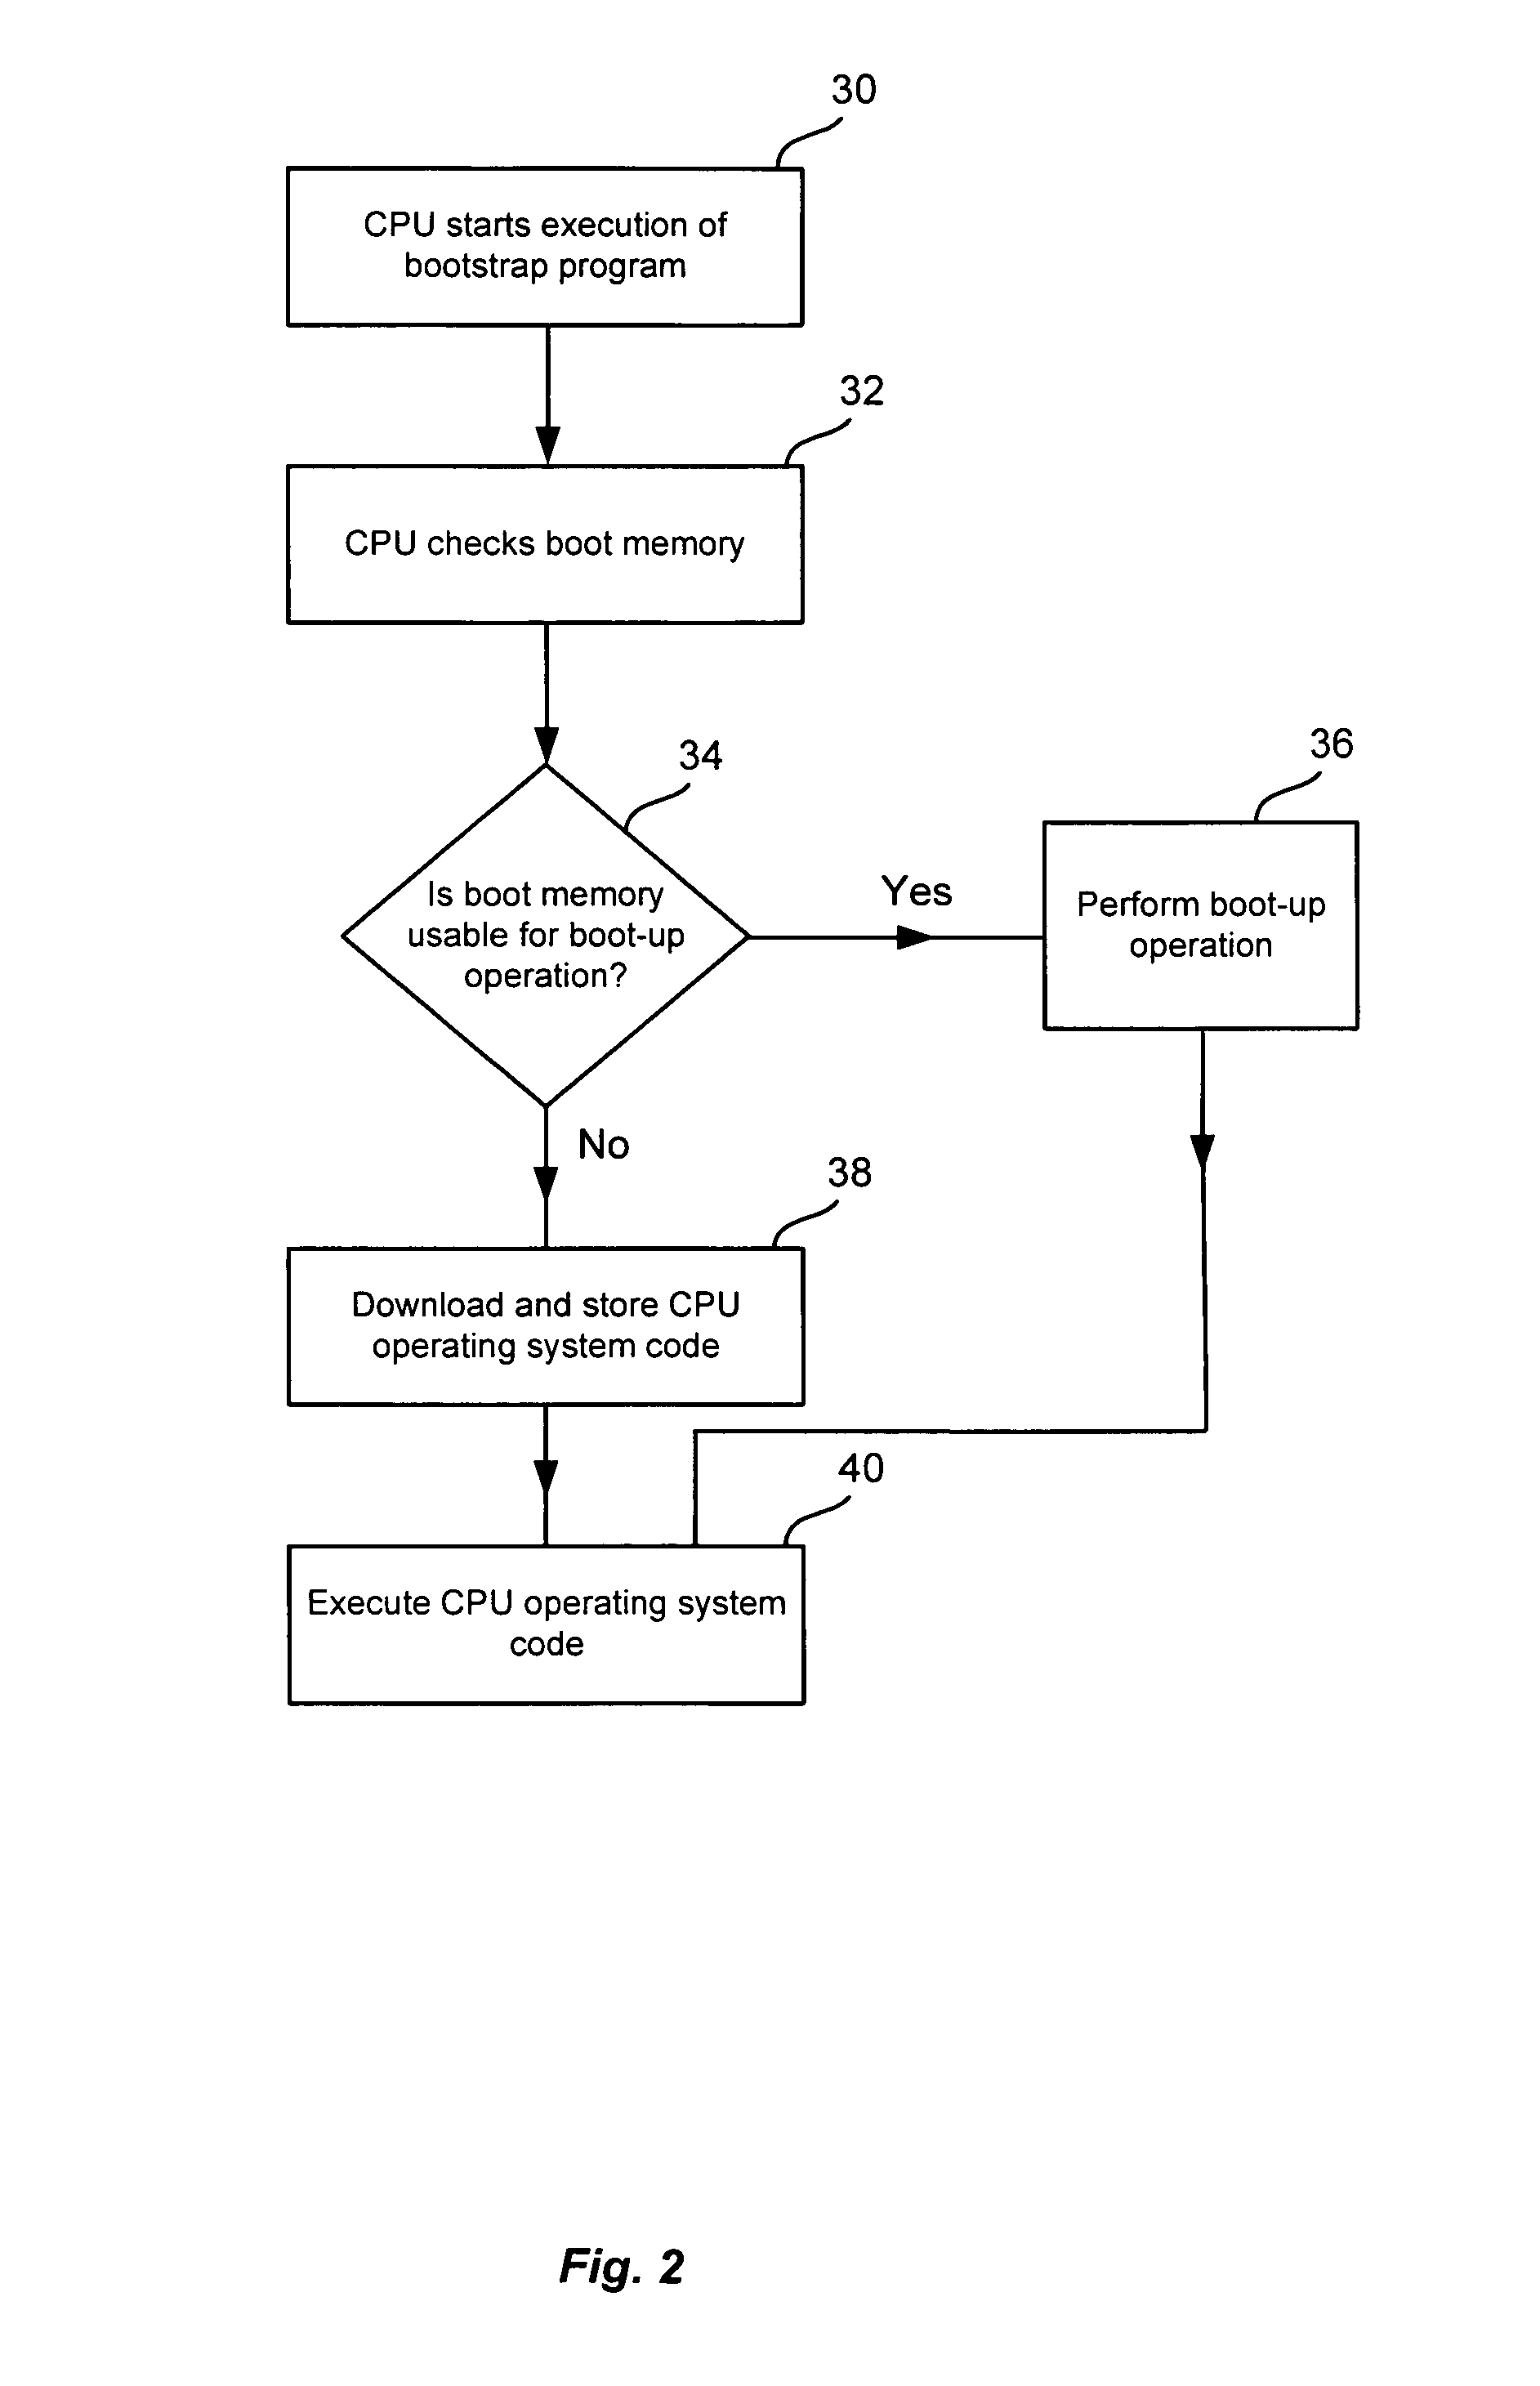 Method and system to provide first boot to a CPU system